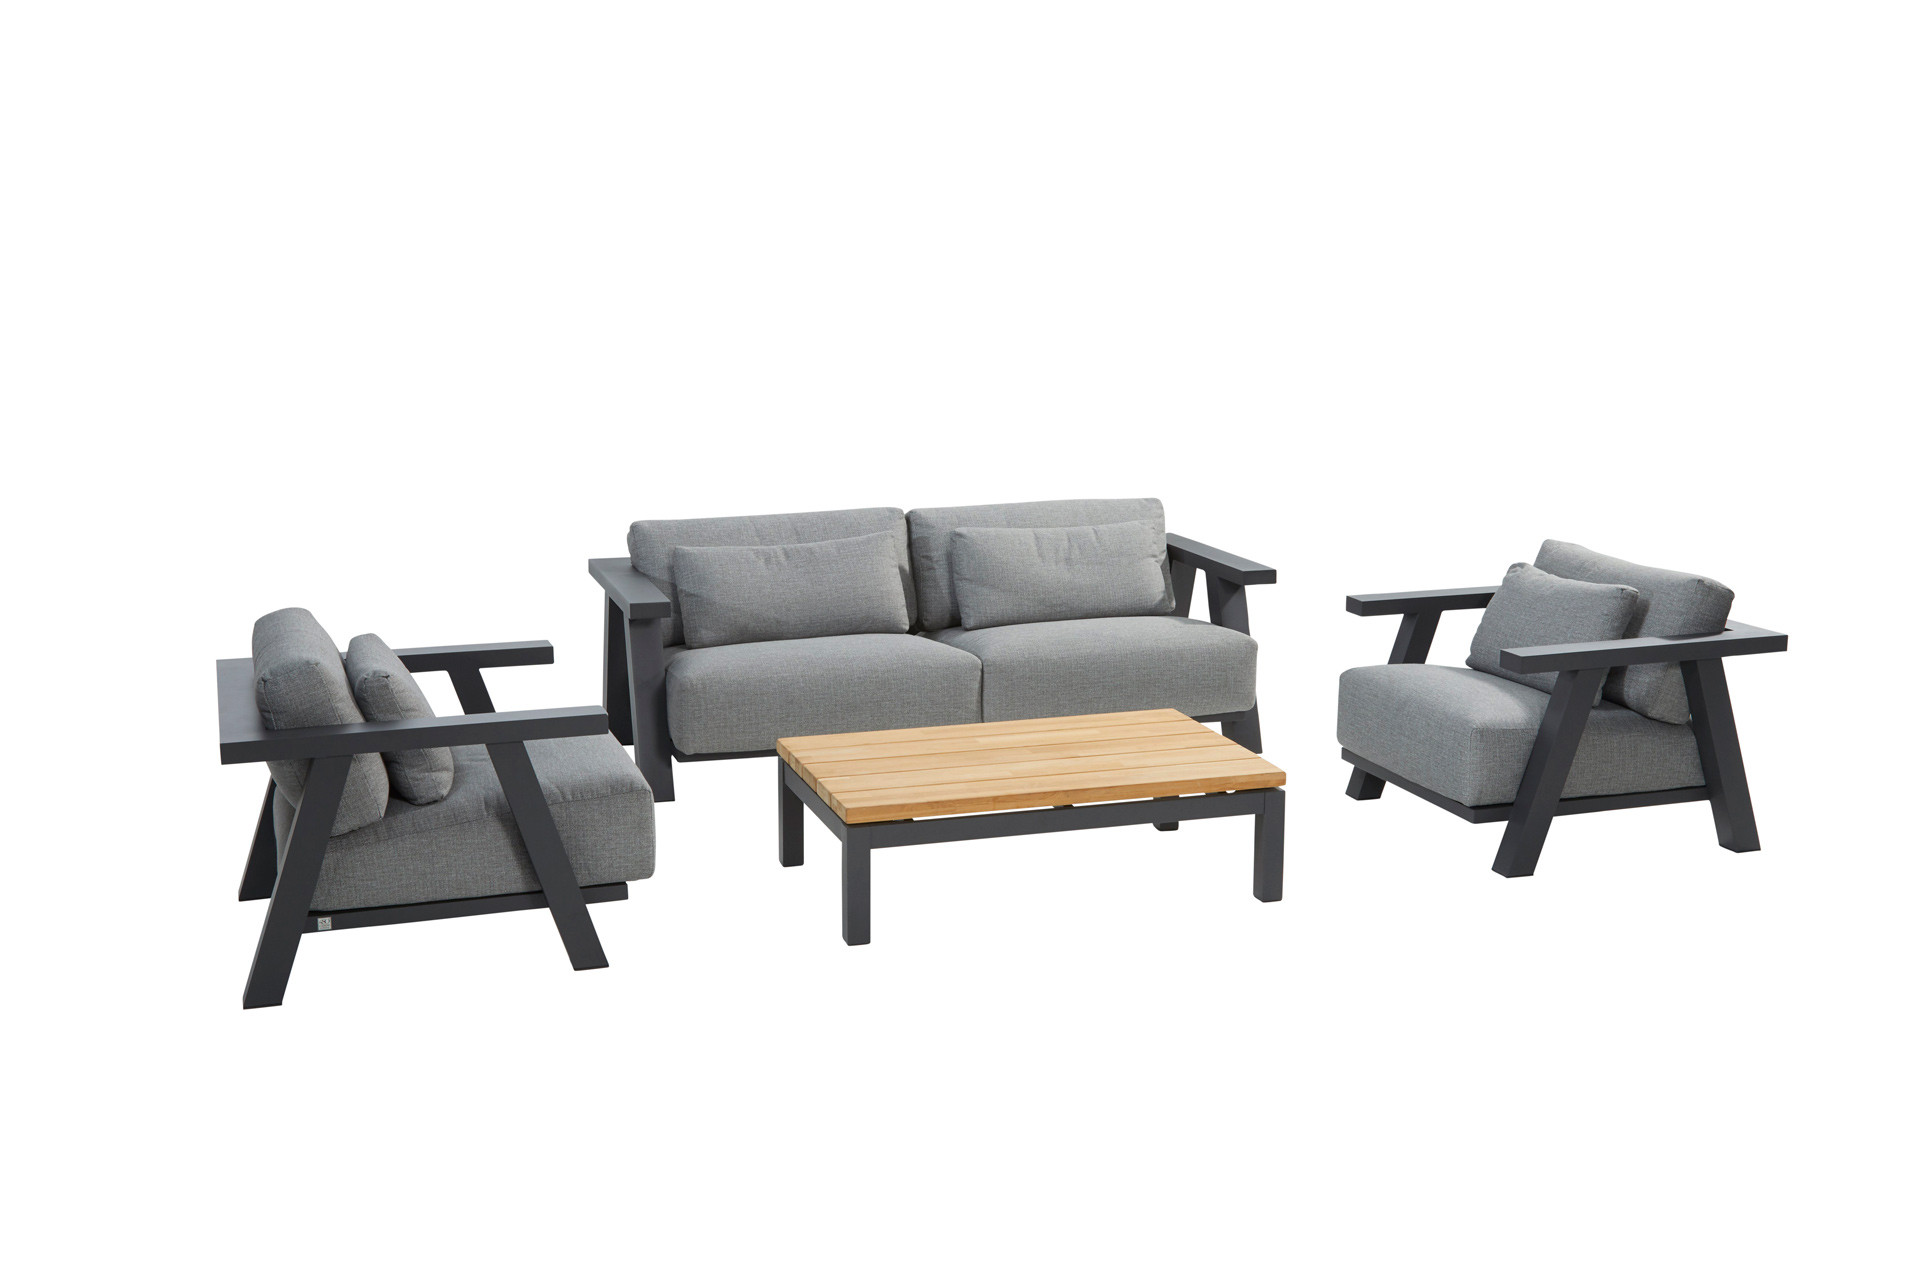 Iconic lounge set with Capitol rectangular coffeetable